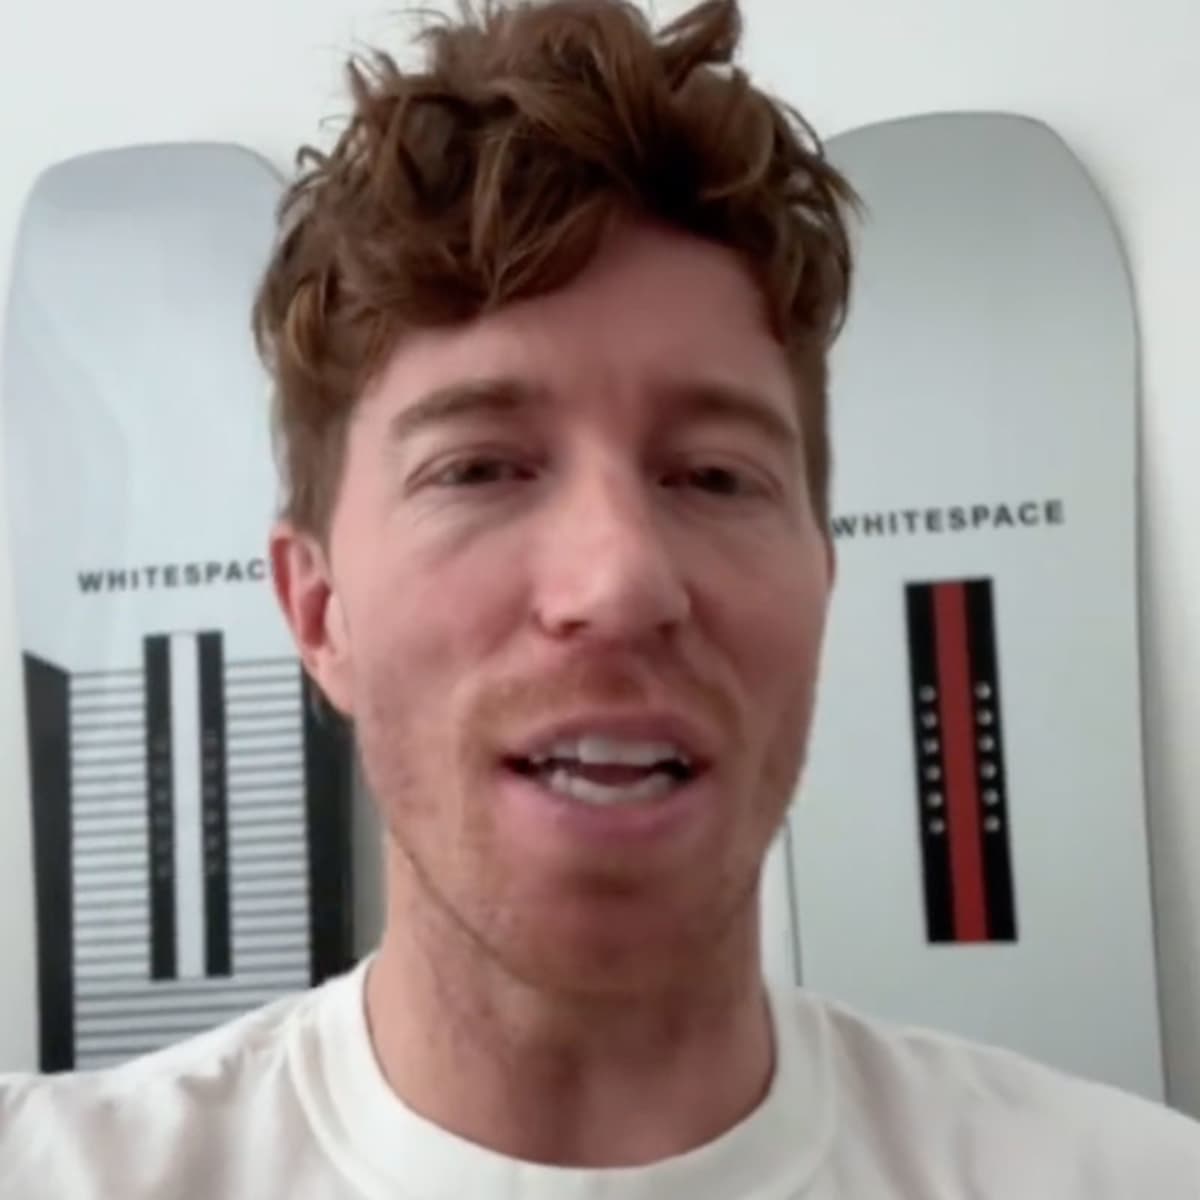 VRBO AND OLYMPIC LEGEND SHAUN WHITE KICK OFF SNOW-BOOKING SEASON WITH  PRIVATE MOUNTAIN EXPERIENCE